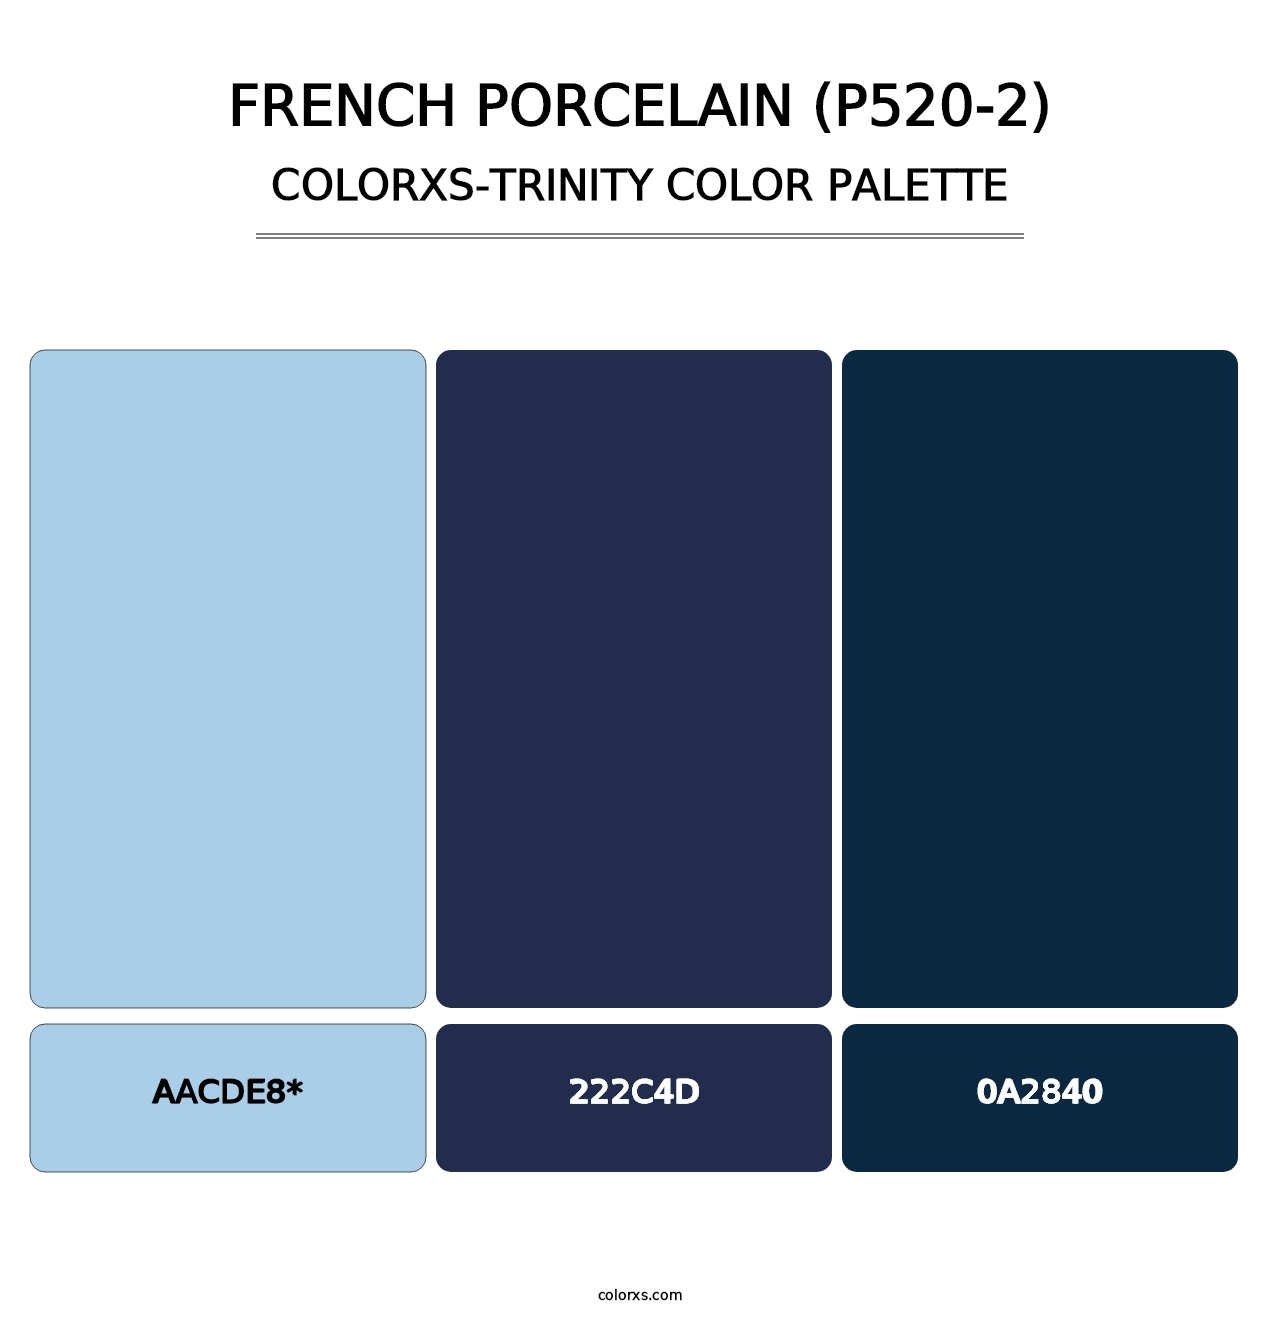 French Porcelain (P520-2) - Colorxs Trinity Palette